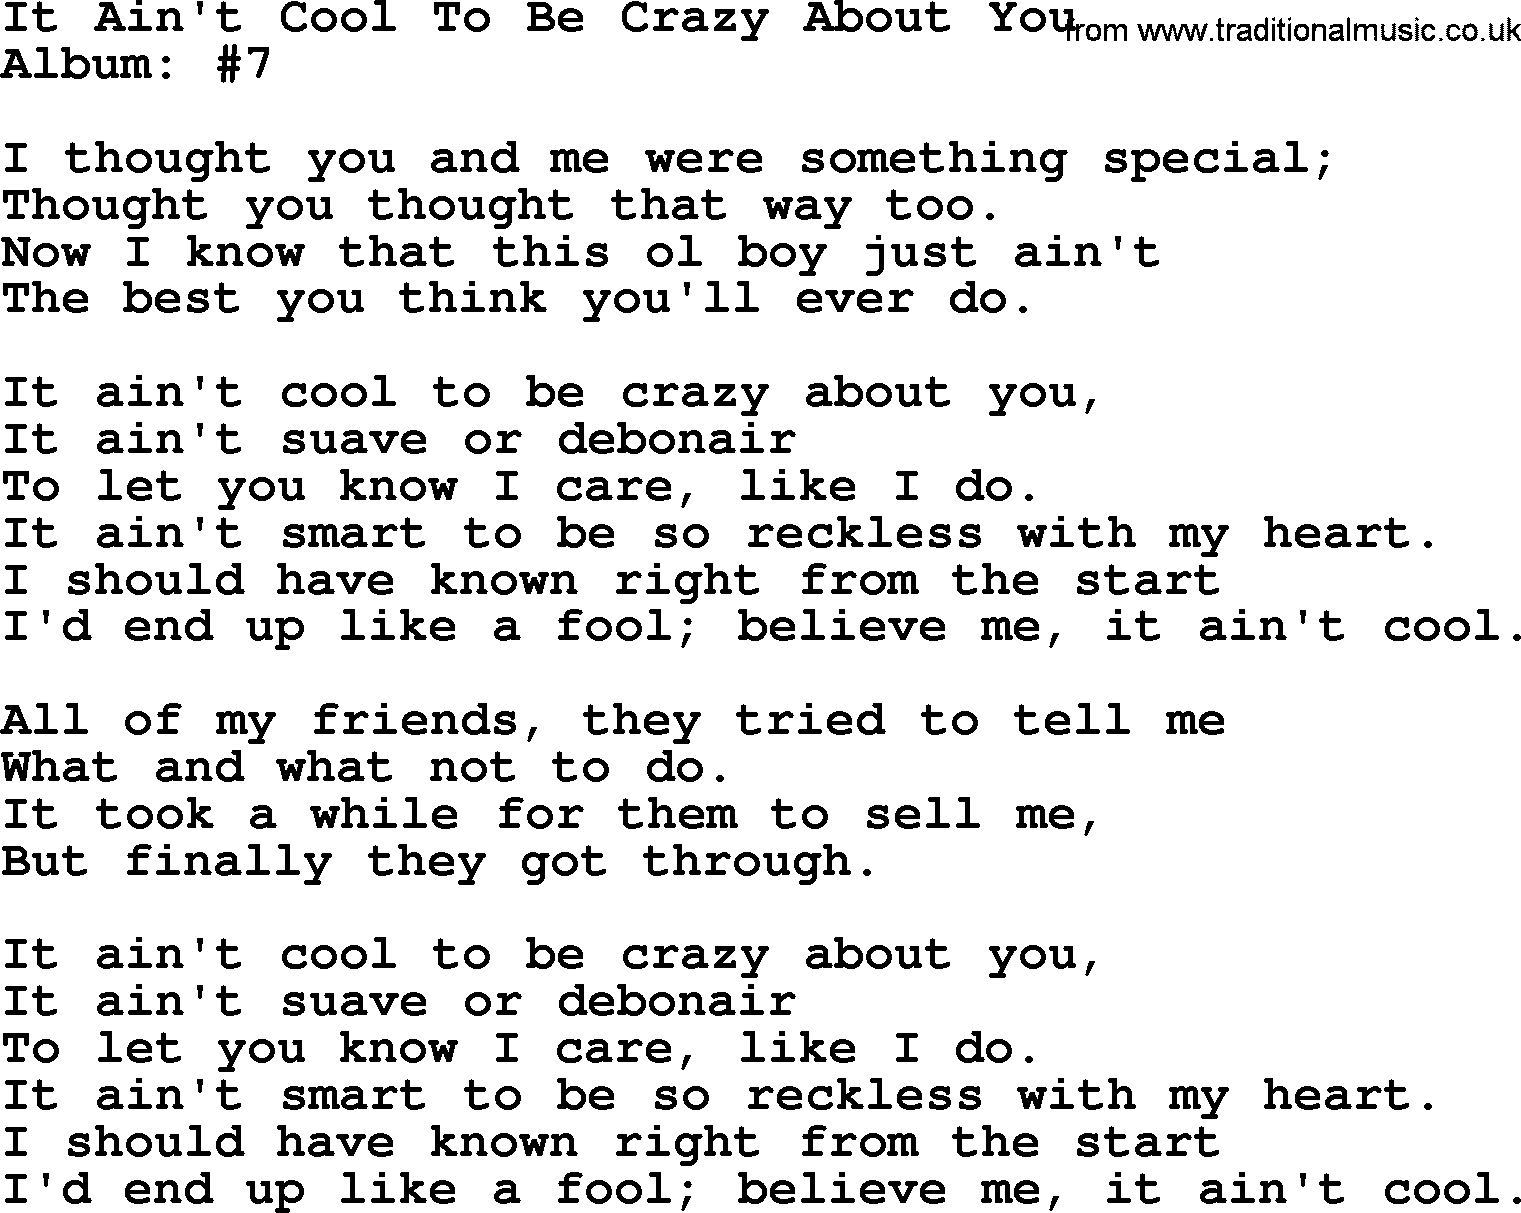 George Strait song: It Ain't Cool To Be Crazy About You, lyrics